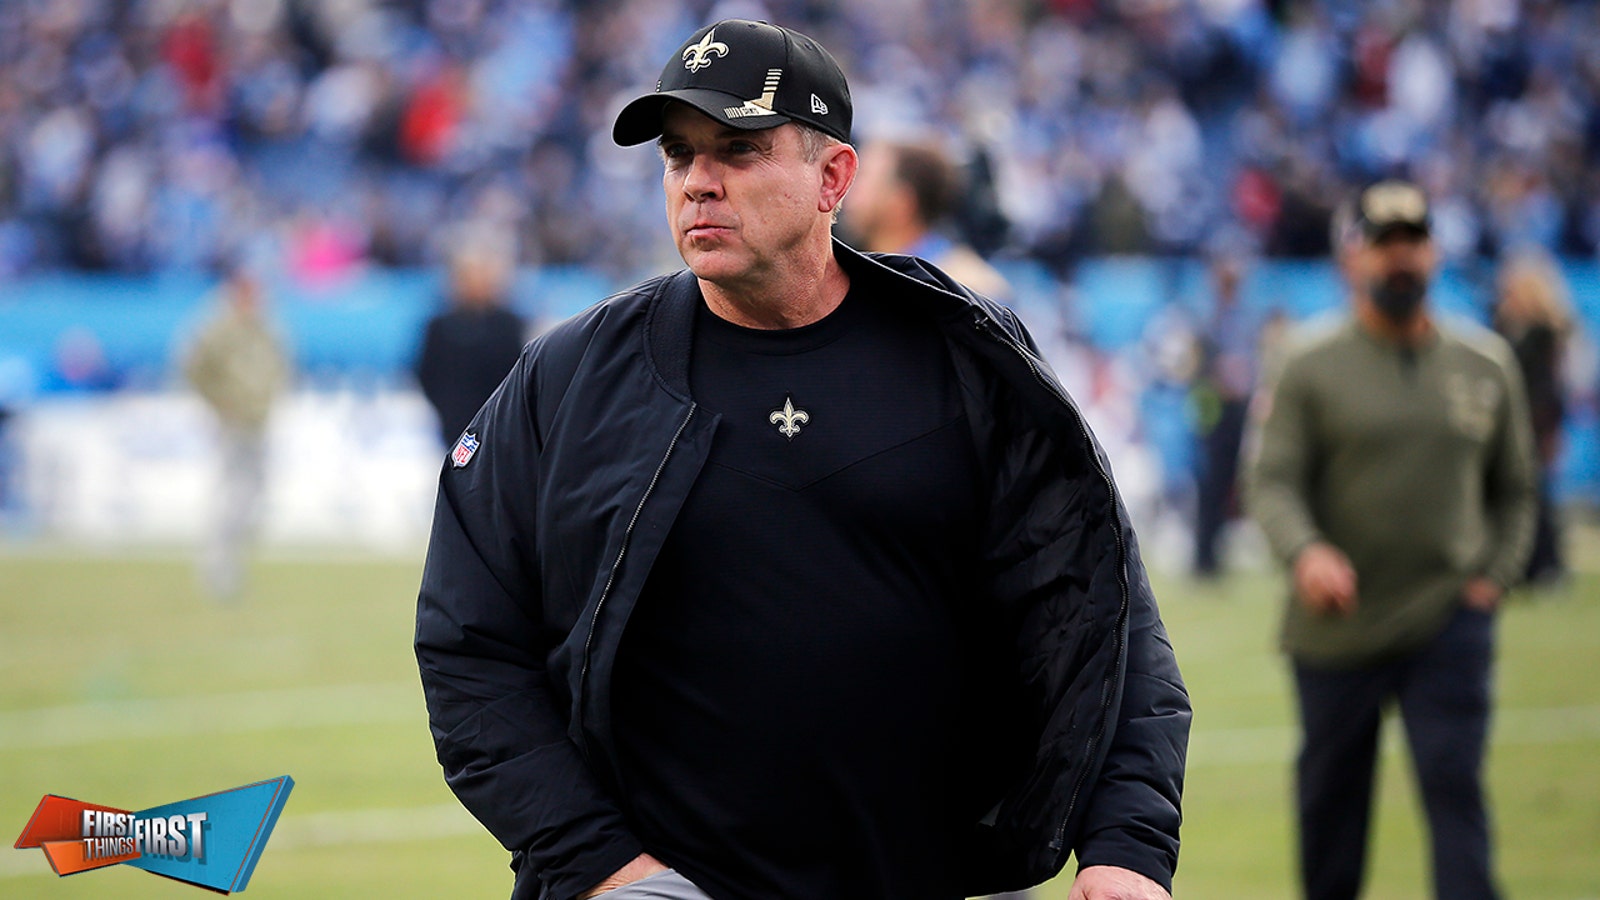 FOX NFL analyst Sean Payton will become the next head coach of the Broncos